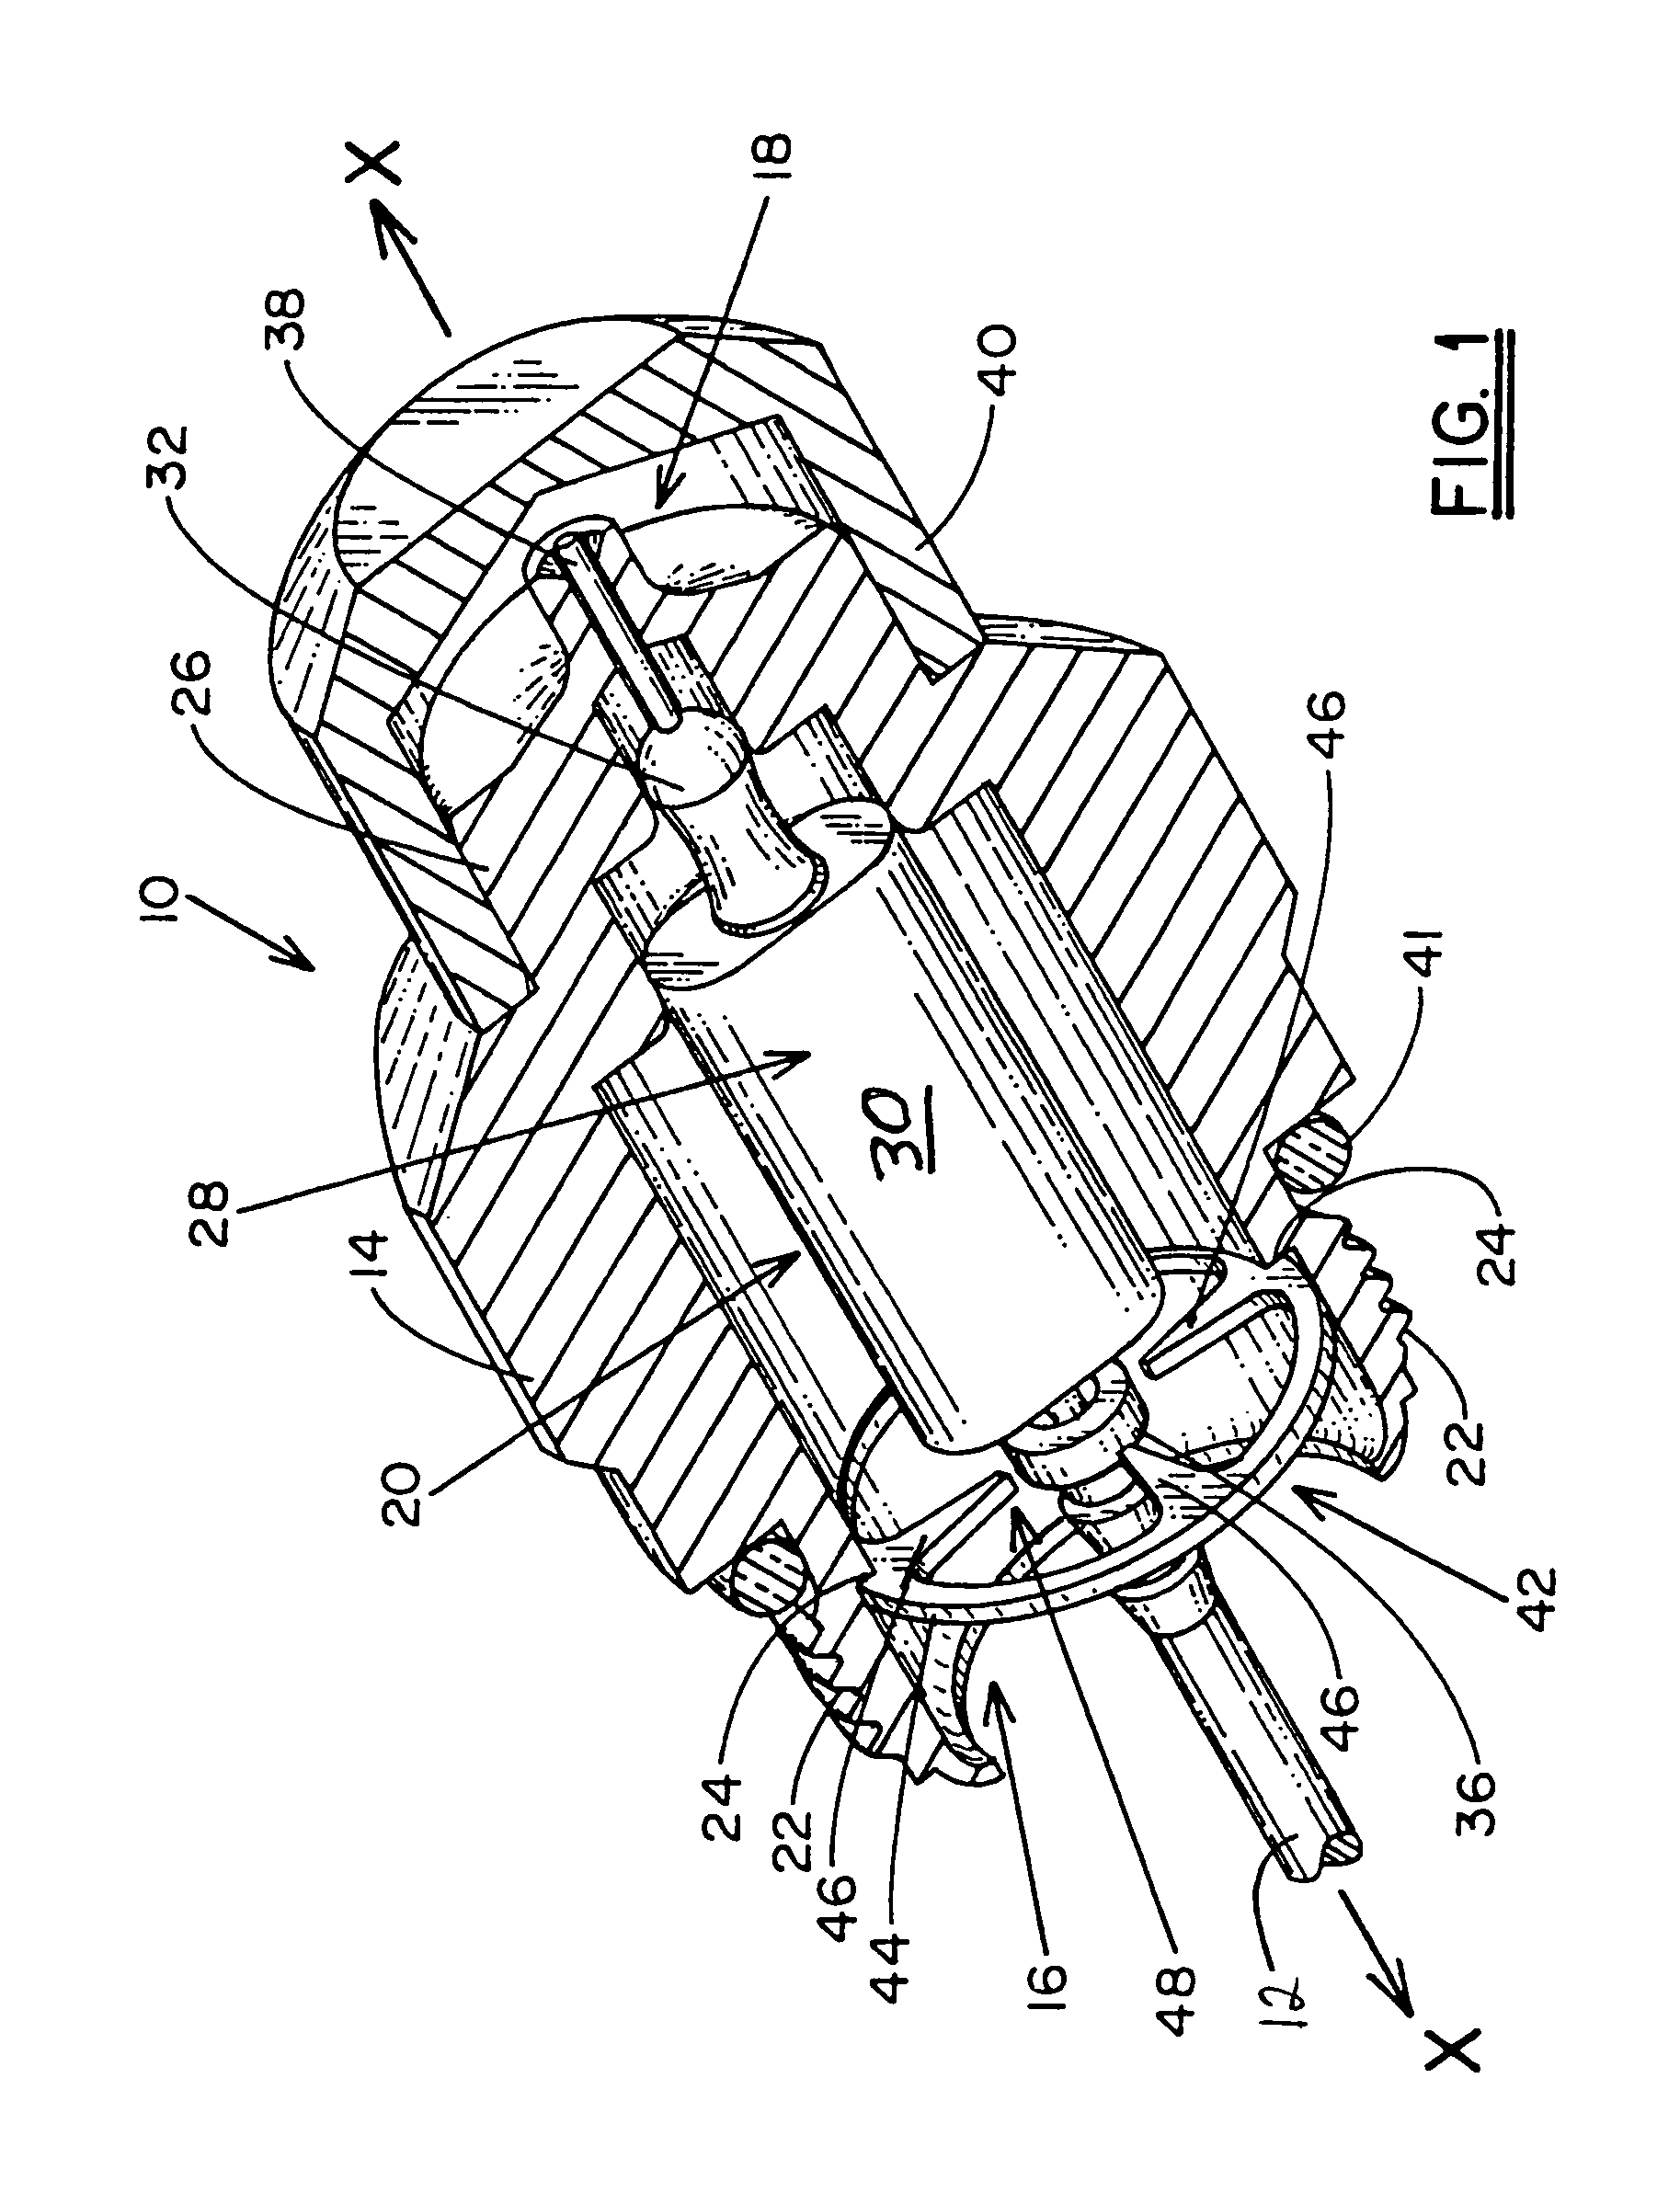 High voltage surge protection element for use with CATV coaxial cable connectors